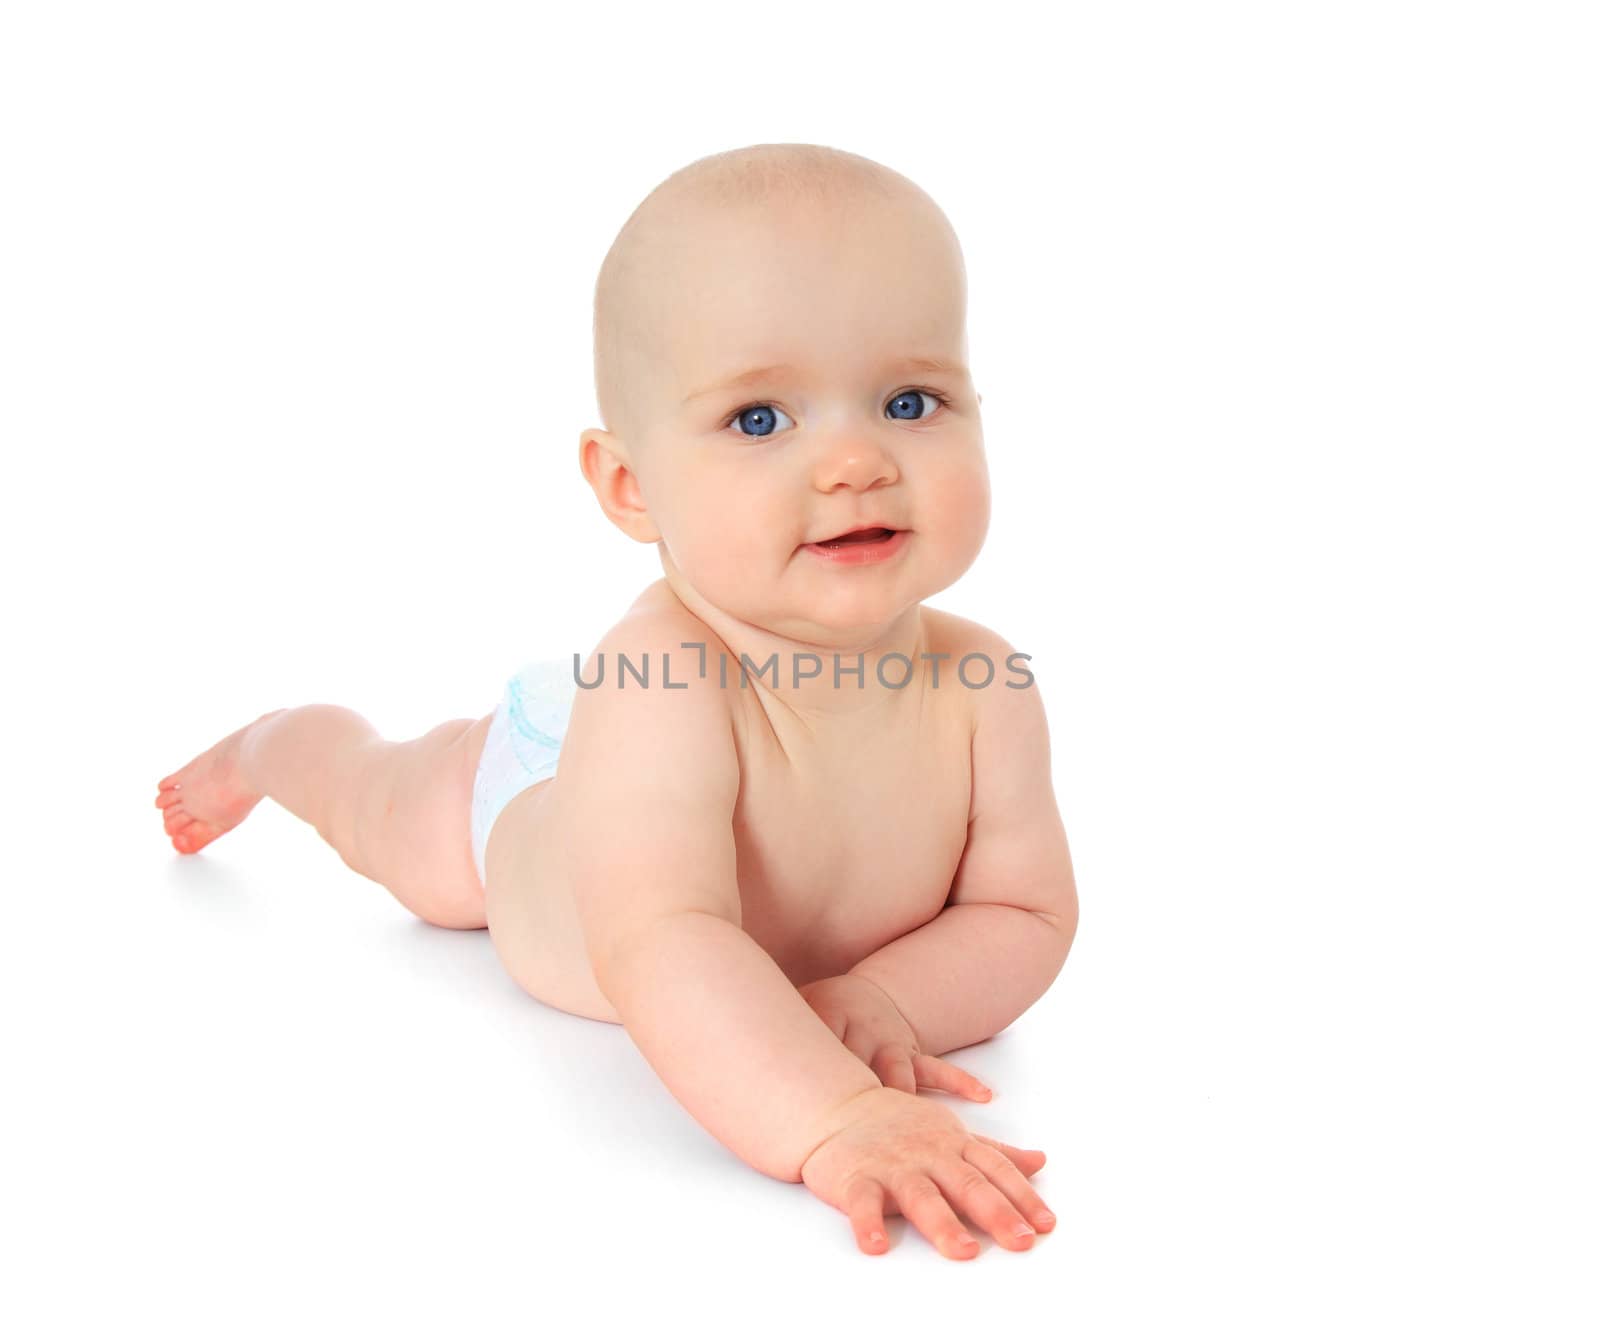 Crawling caucasian baby. All on white background.